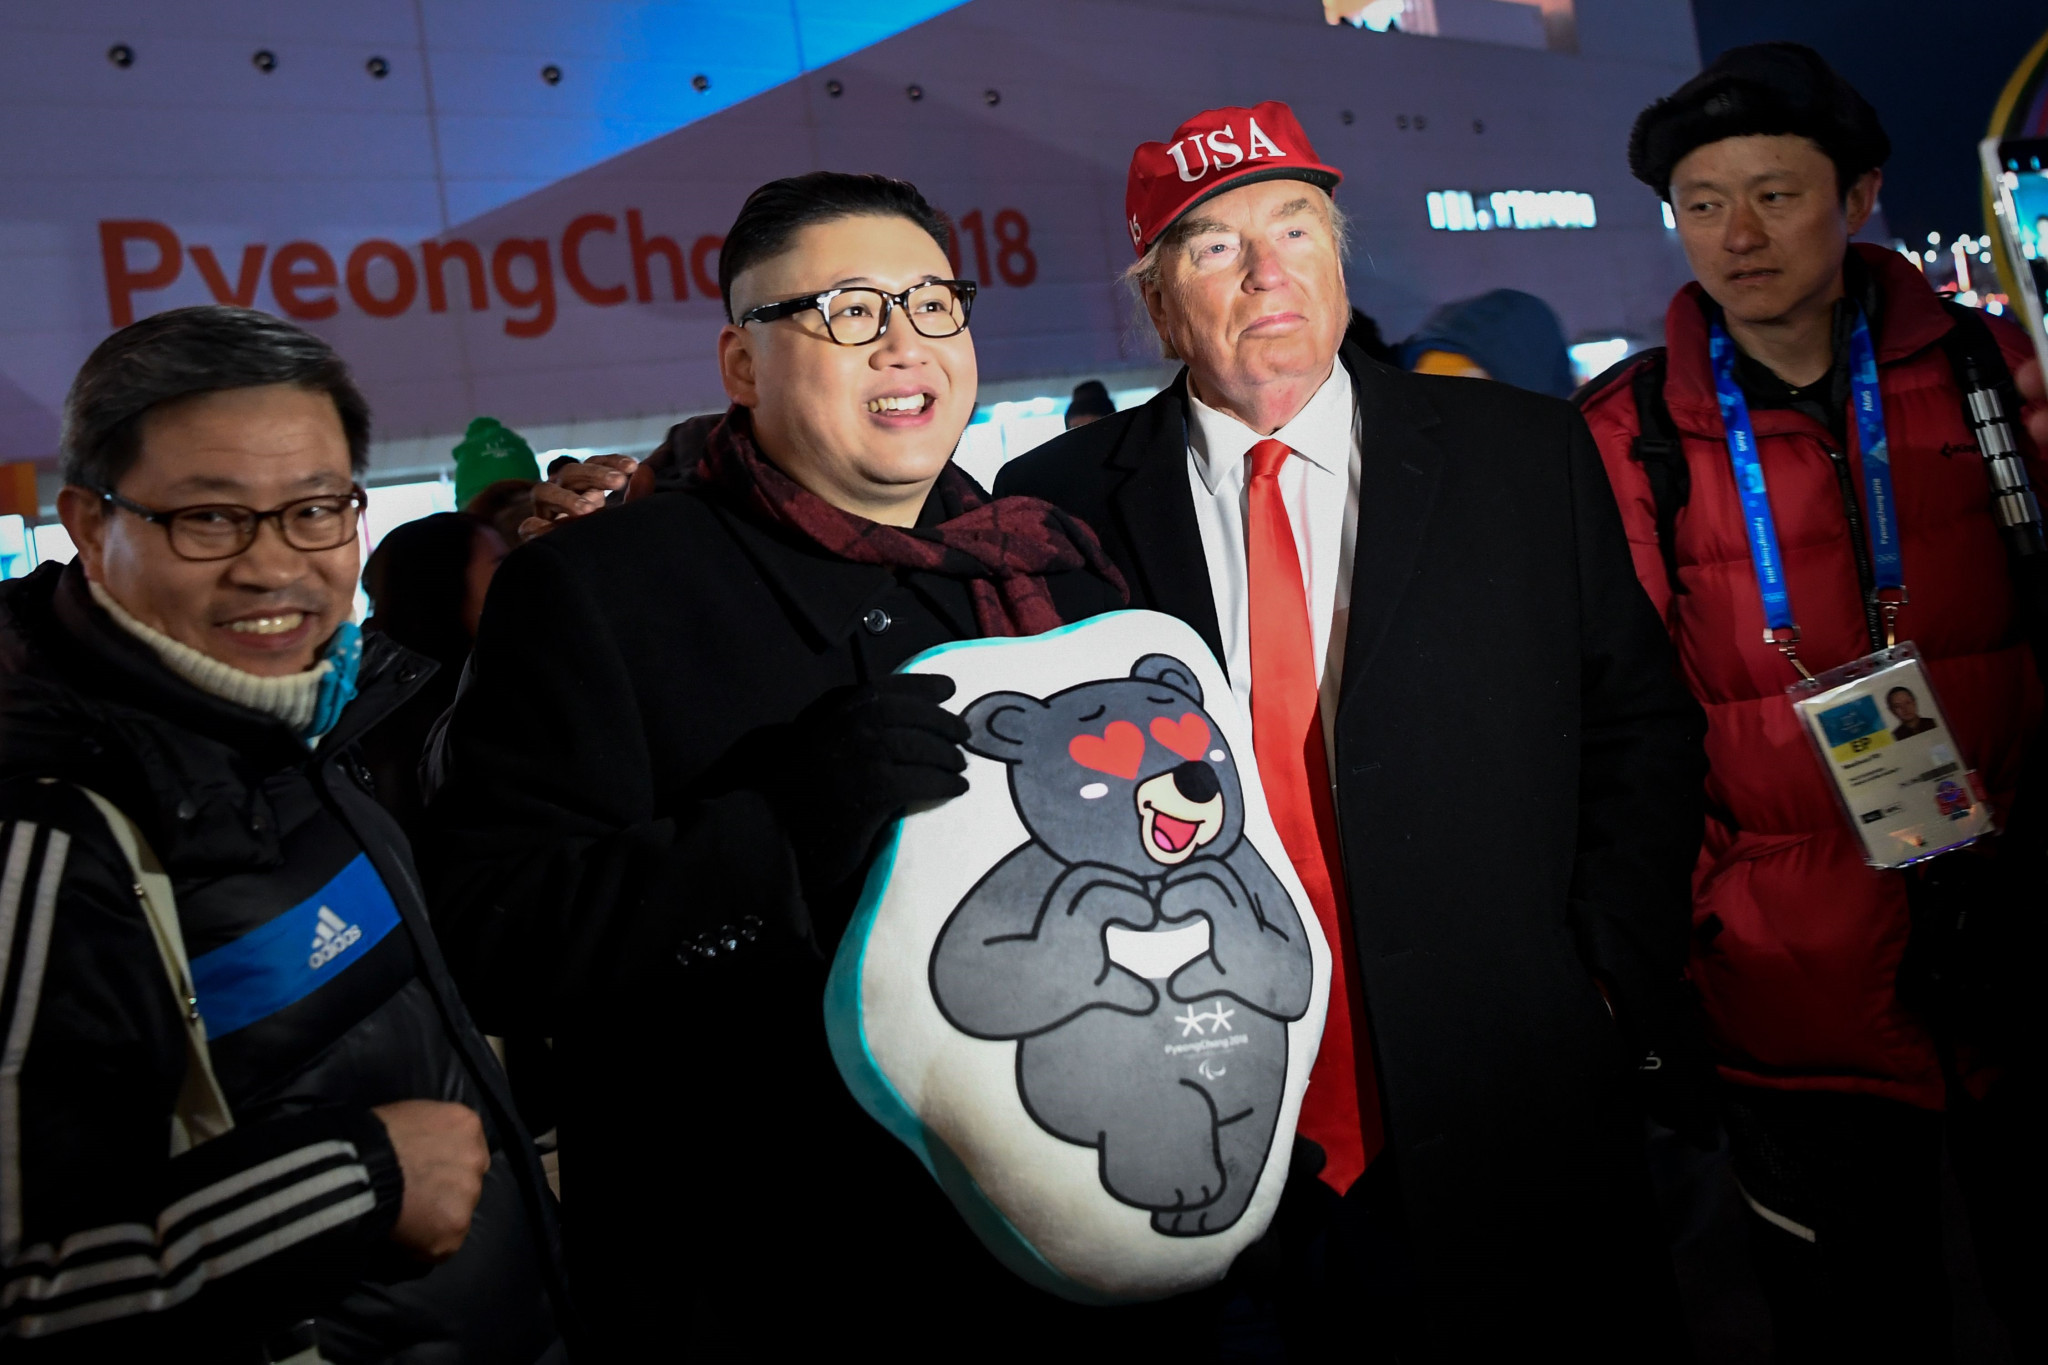 Donald Trump and Kim Jong-un impersonators gatecrashed the Opening Ceremony of the 2018 Winter Olympic Games in Pyeongchang - but the real Kim and Trump could meet soon ©Getty Images